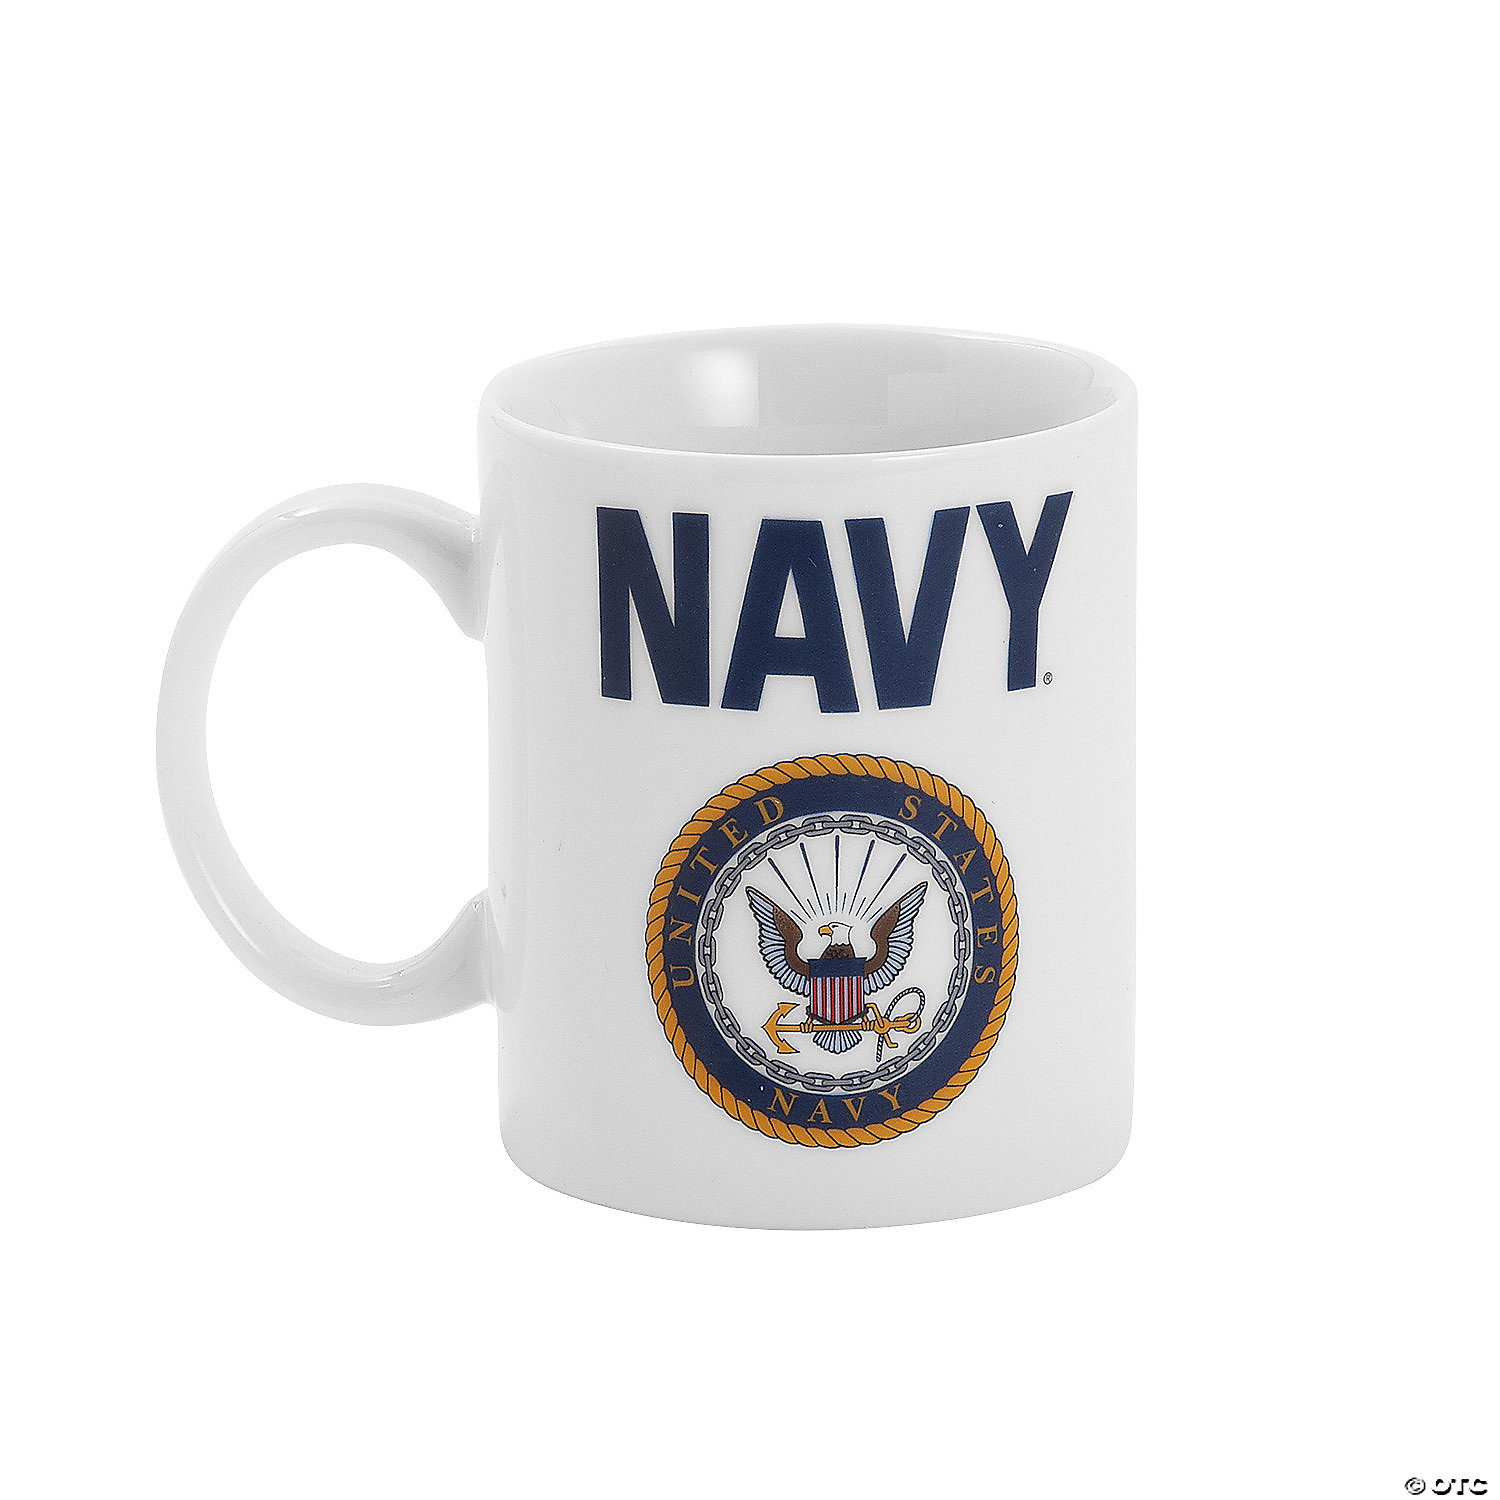 Black Coffee Travel Mug with Department of the NAVY Emblem 